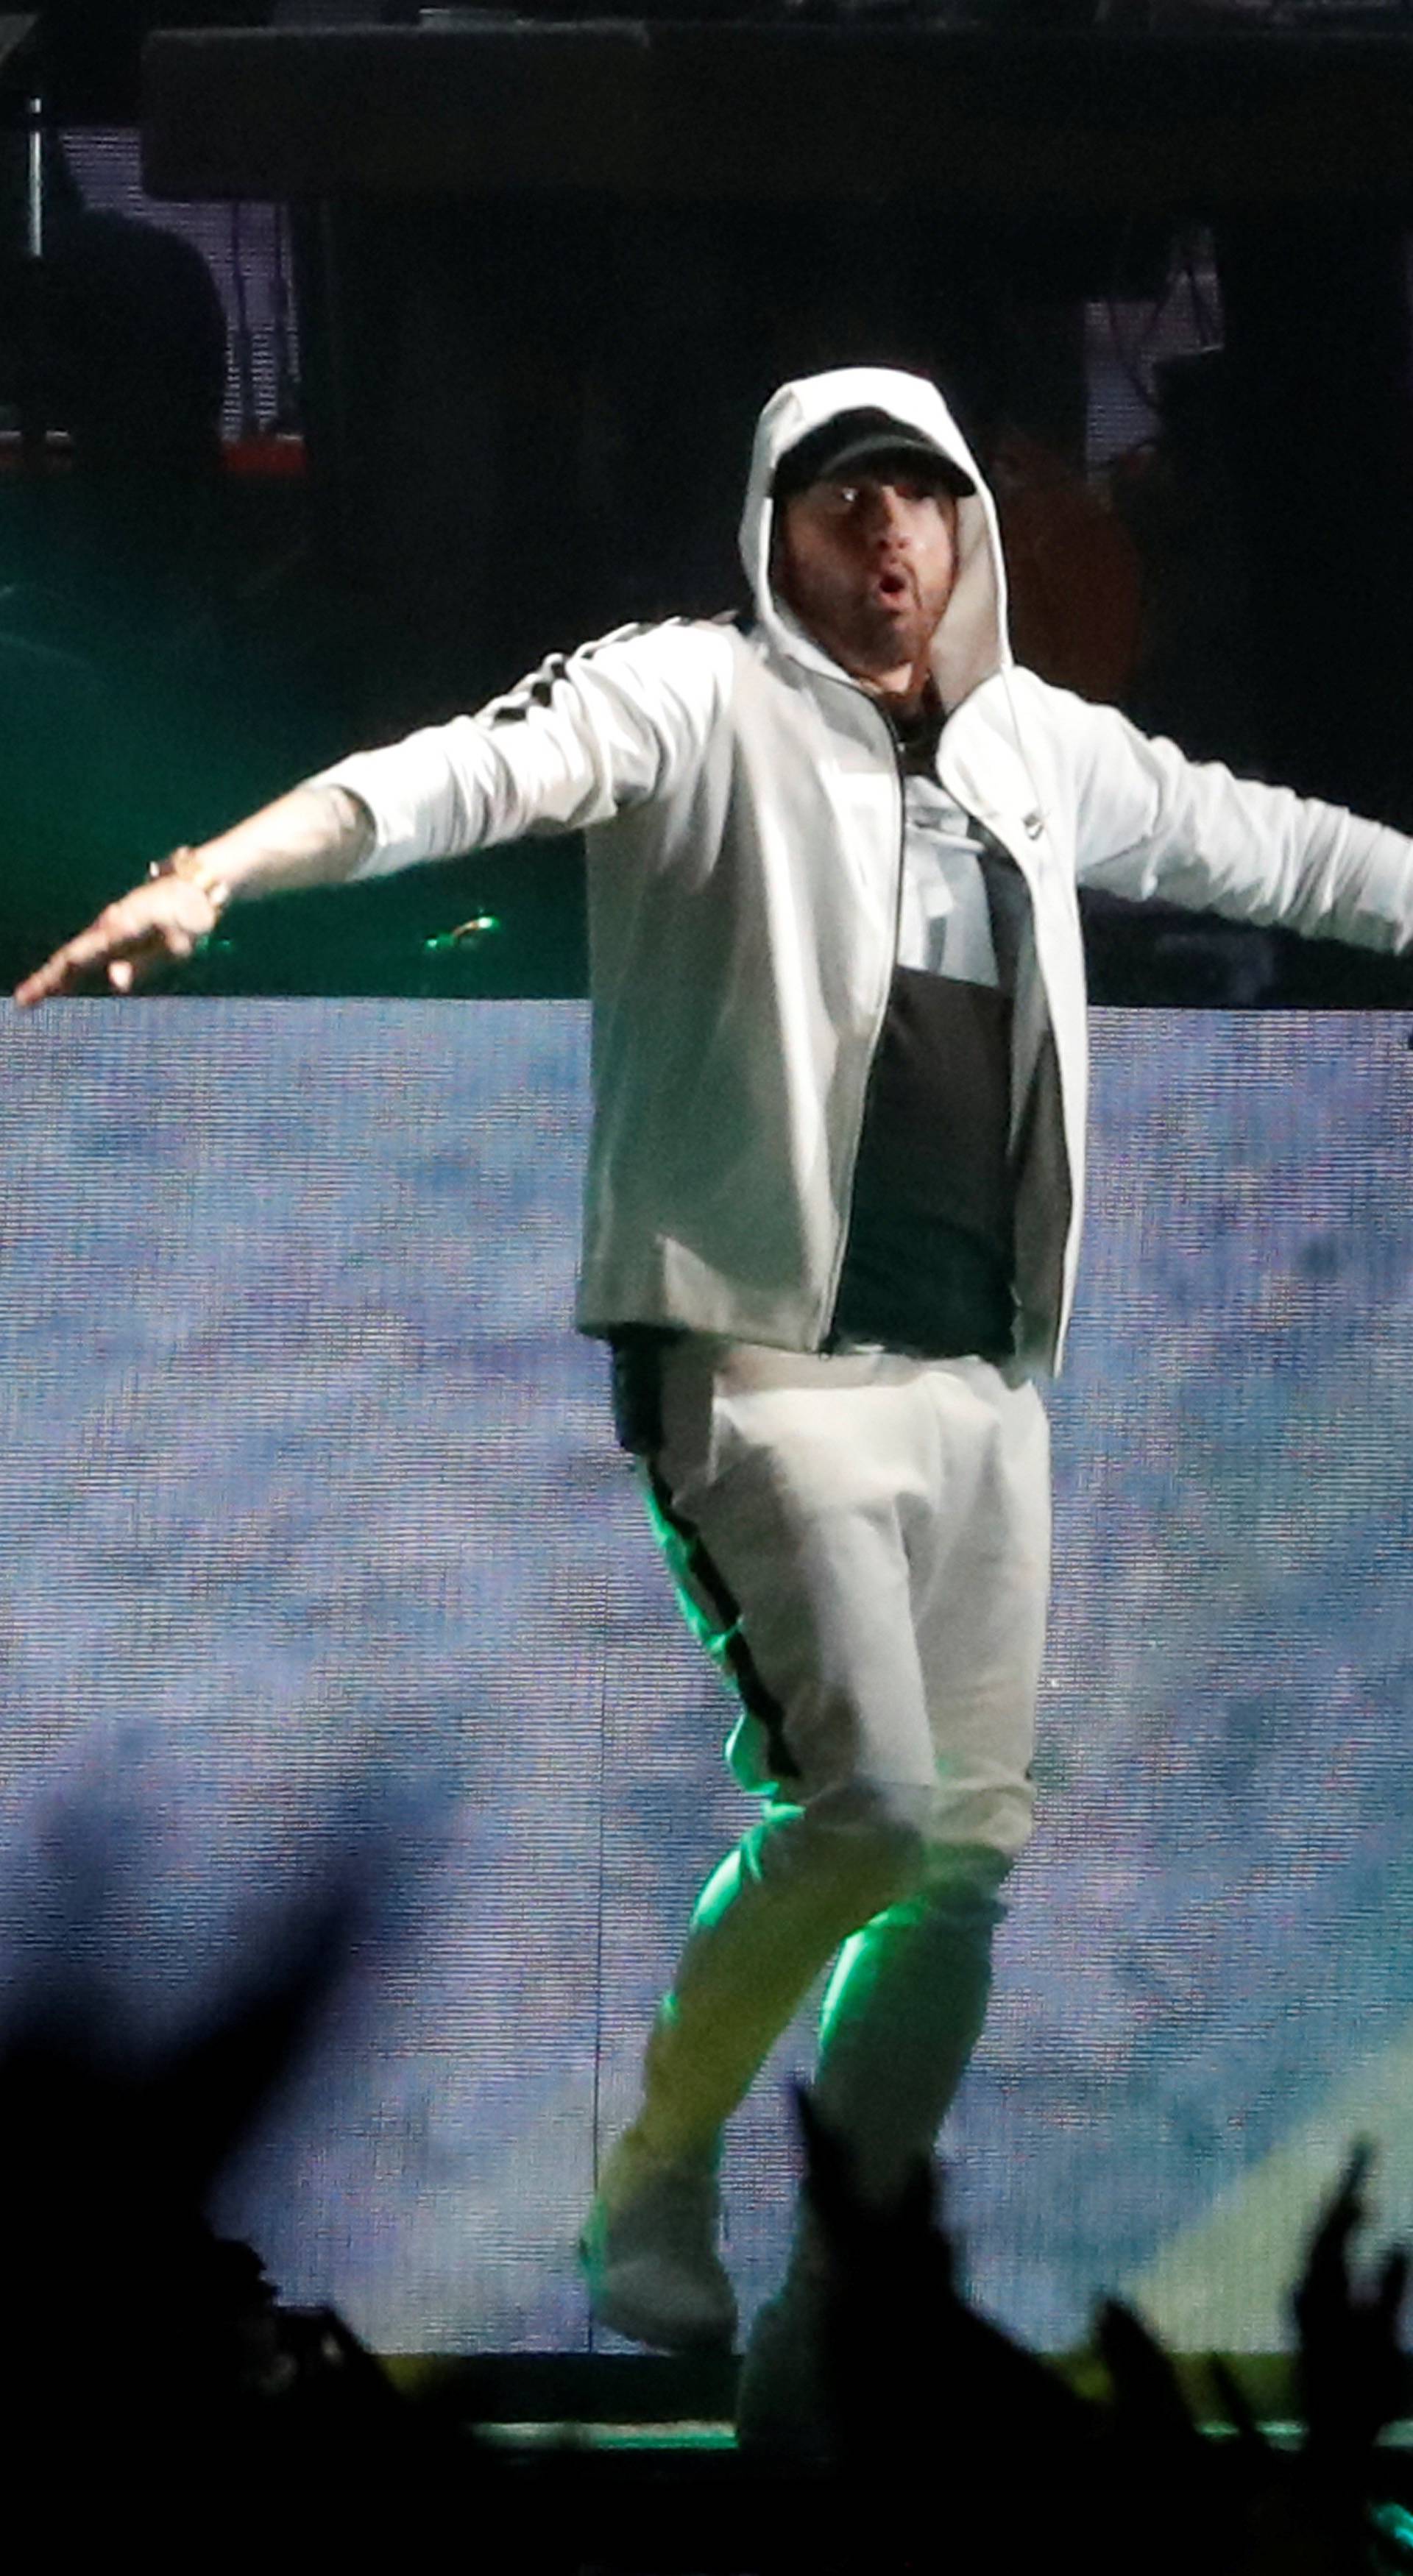 Eminem performs at the Coachella Valley Music and Arts Festival in Indio